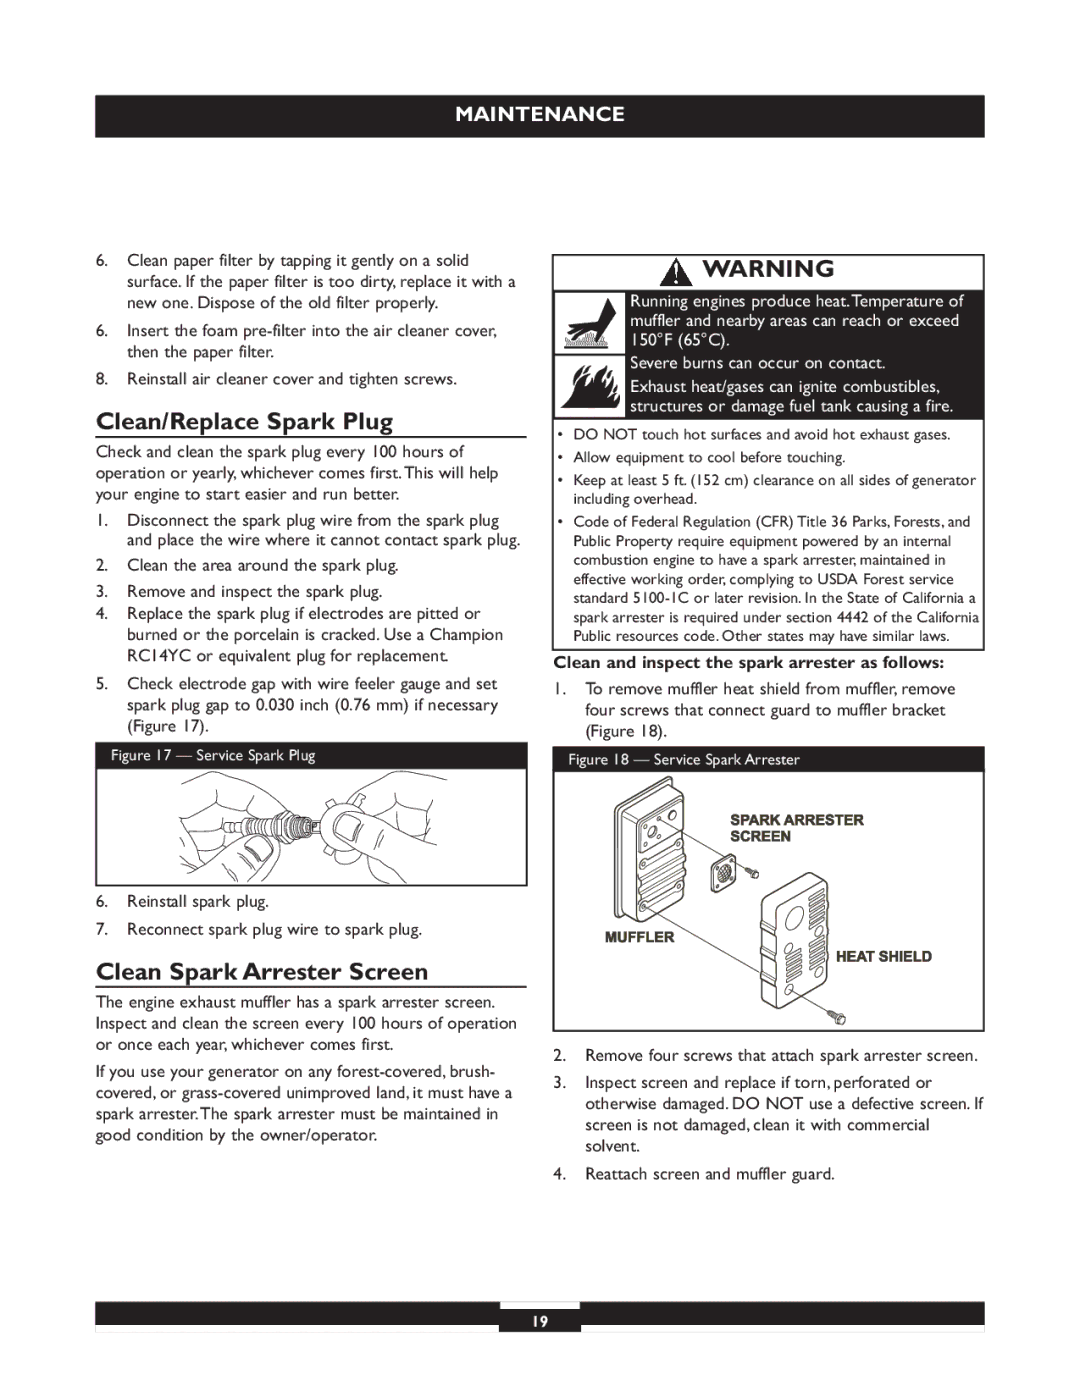 Briggs & Stratton 30244 operating instructions Clean/Replace Spark Plug, Clean Spark Arrester Screen 